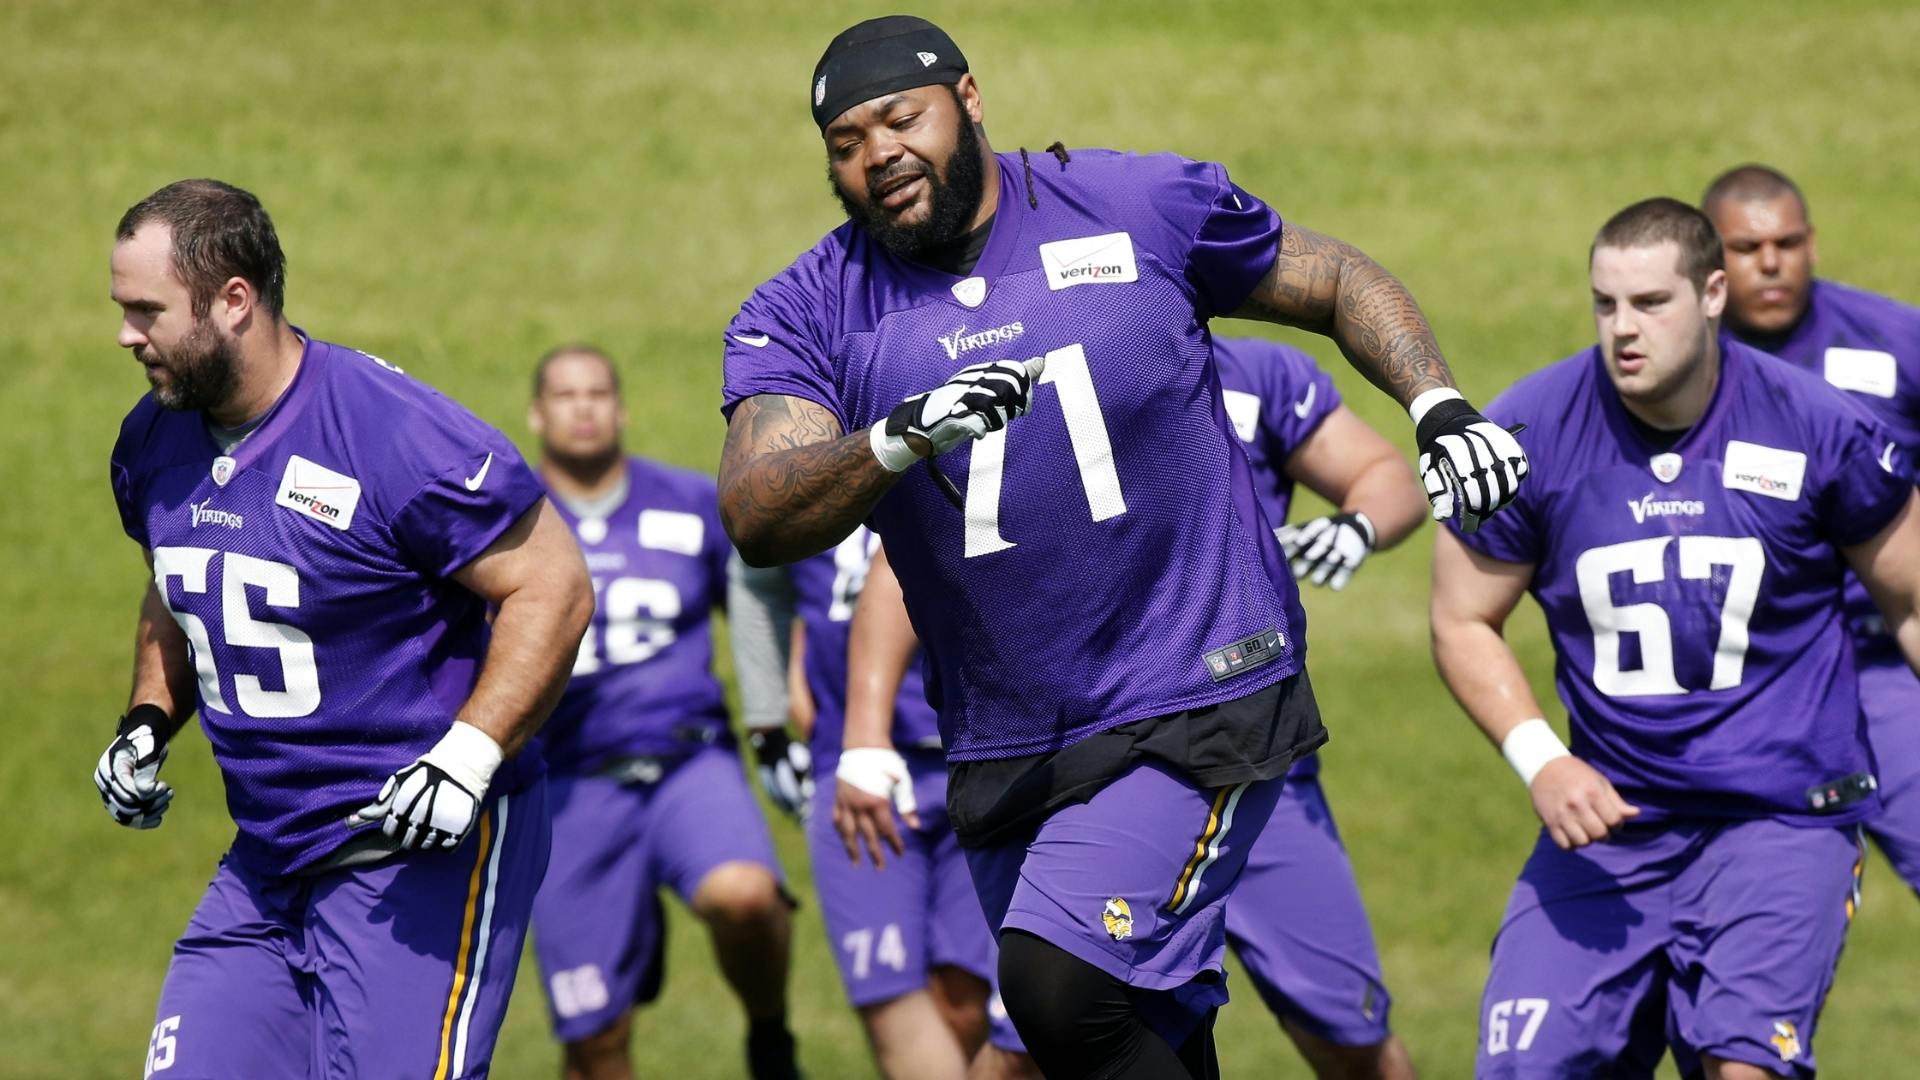 The Vikings return four starters along the offensive line, and Vikings offensive coordinator Norv Turner said he expects the unit to have a good season.